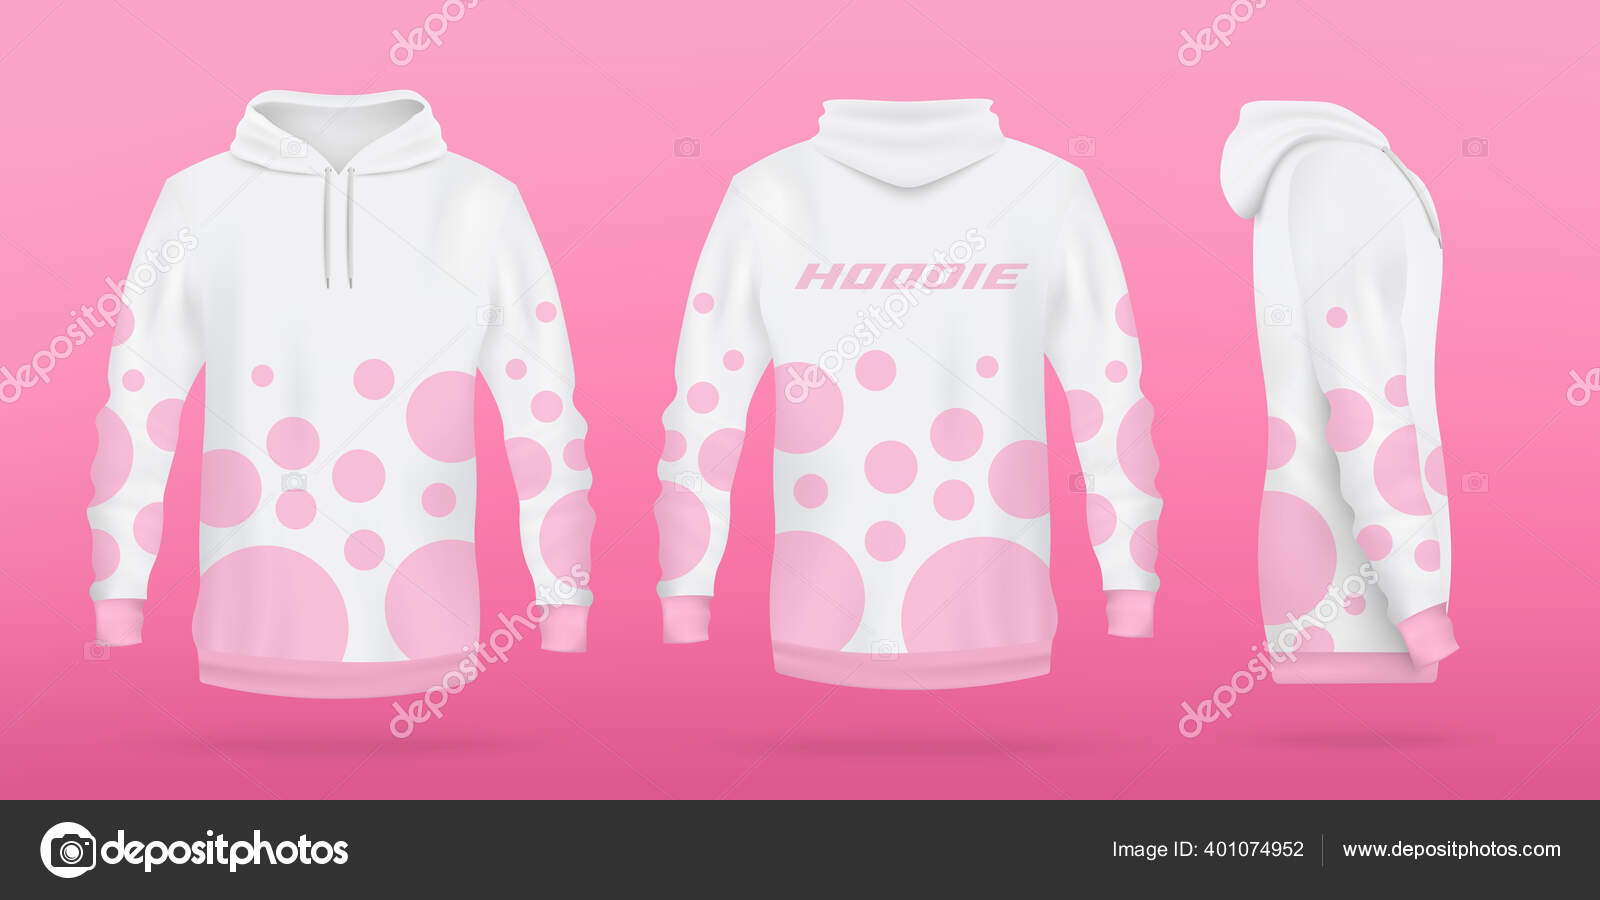 Download White Sweatshirt Or Hoodie Template Realistic Vector Illustration Isolated Vector Image By C Sabelskaya Vector Stock 401074952